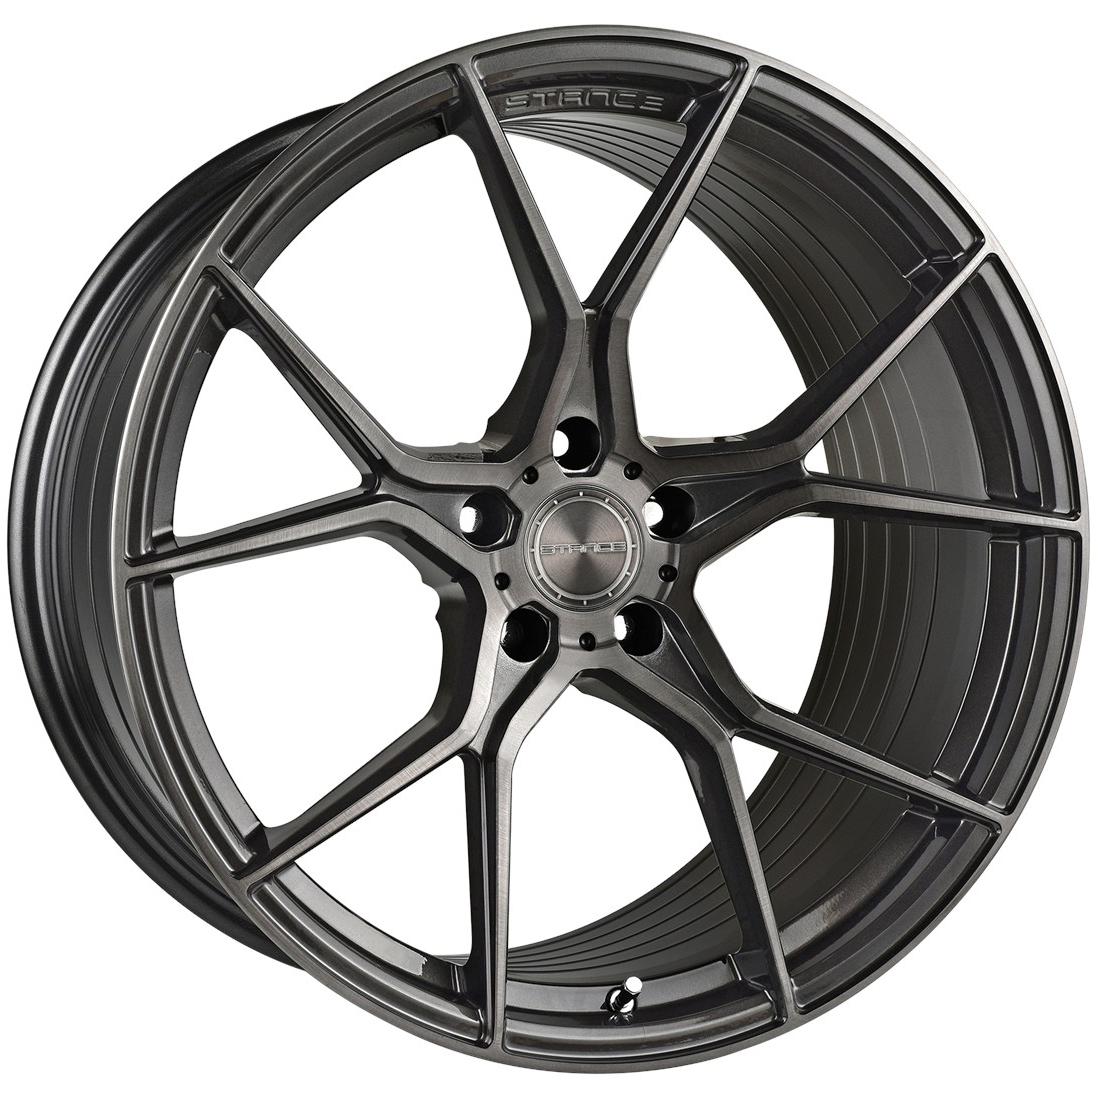 Stance Wheels Logo - Stance SF07 | Stance Wheels Rims |Stance SF07 Rims | wheel and Tires